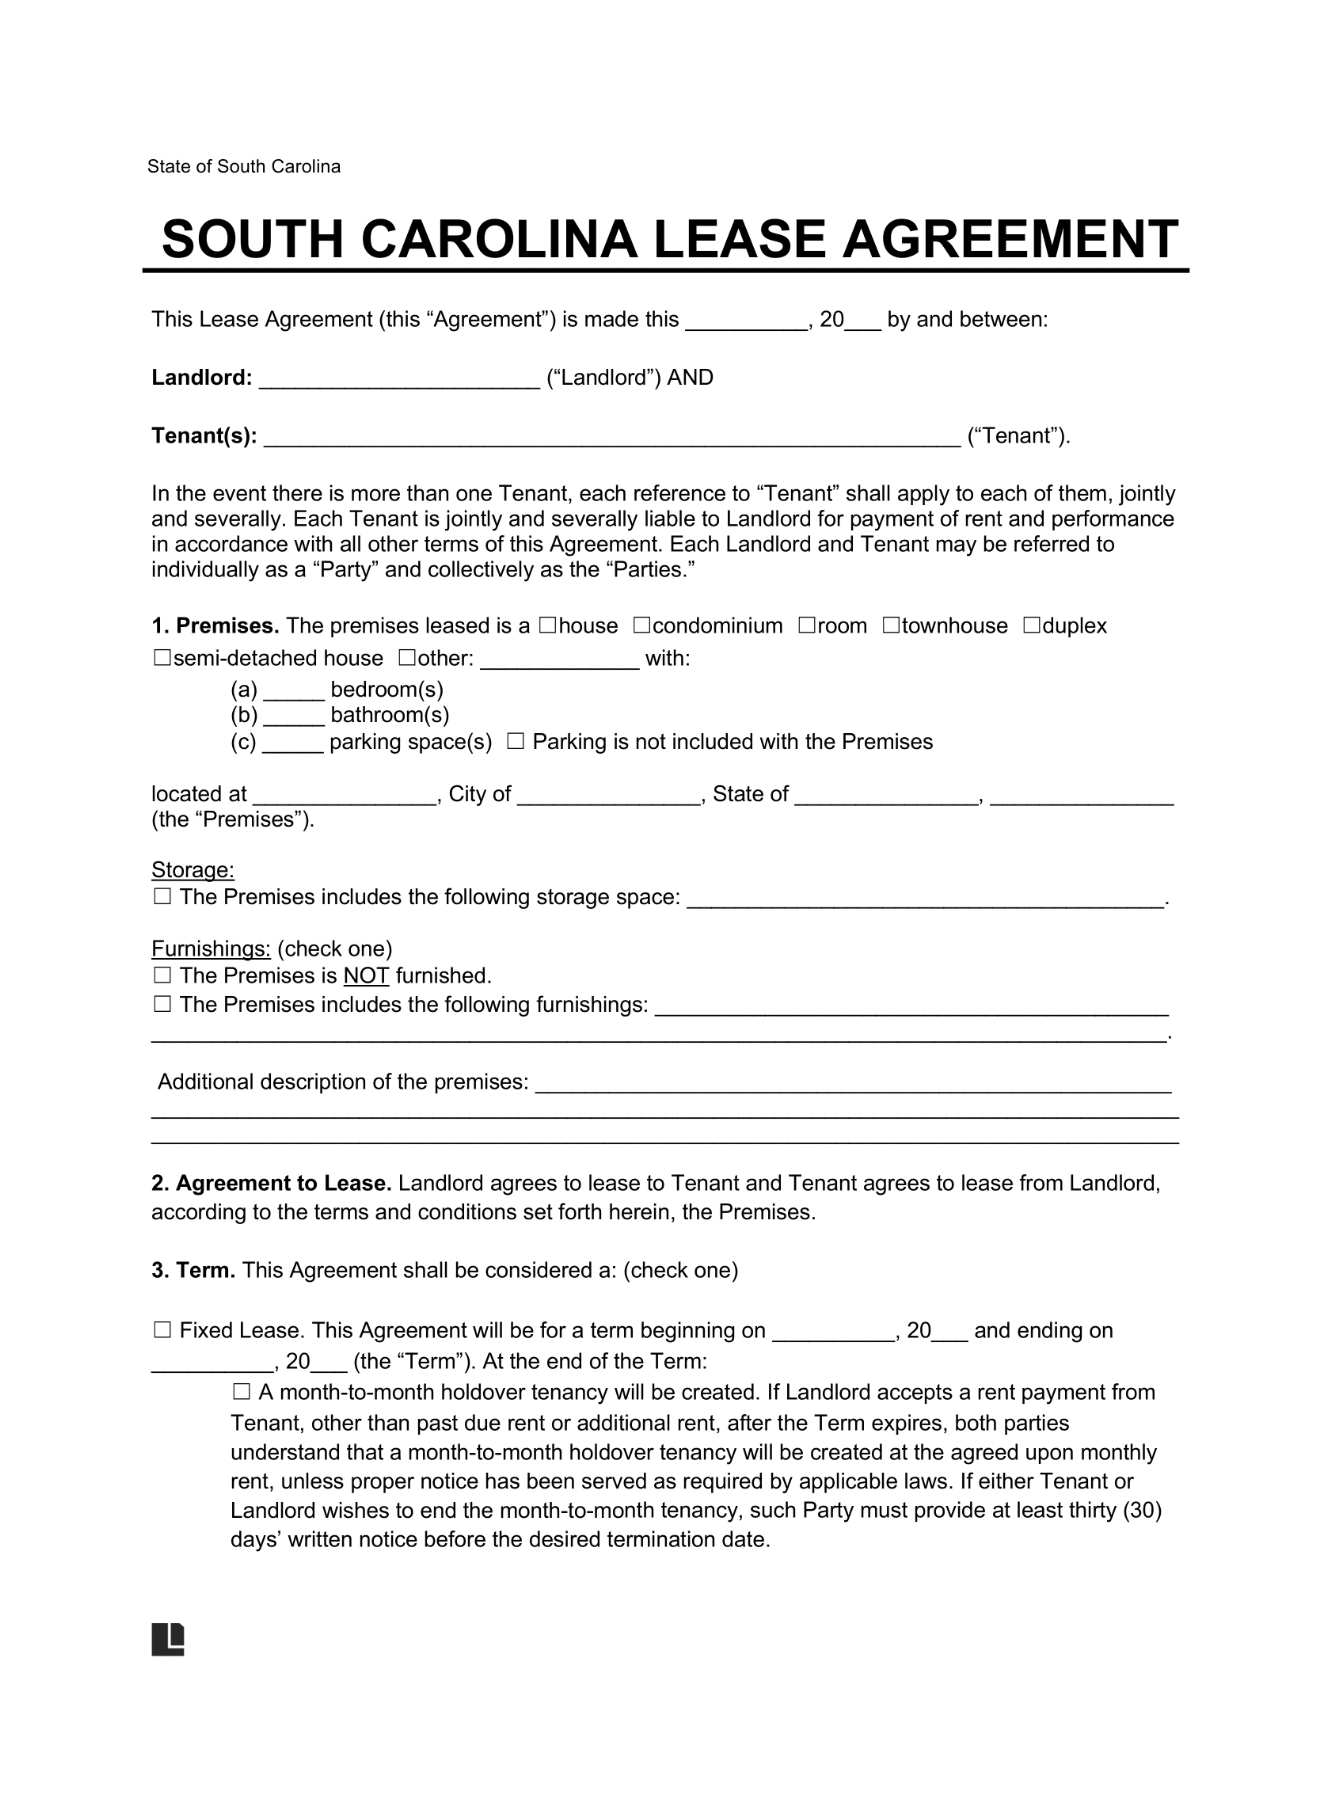 LegalTemplates South Carolina Residential Lease Agreement